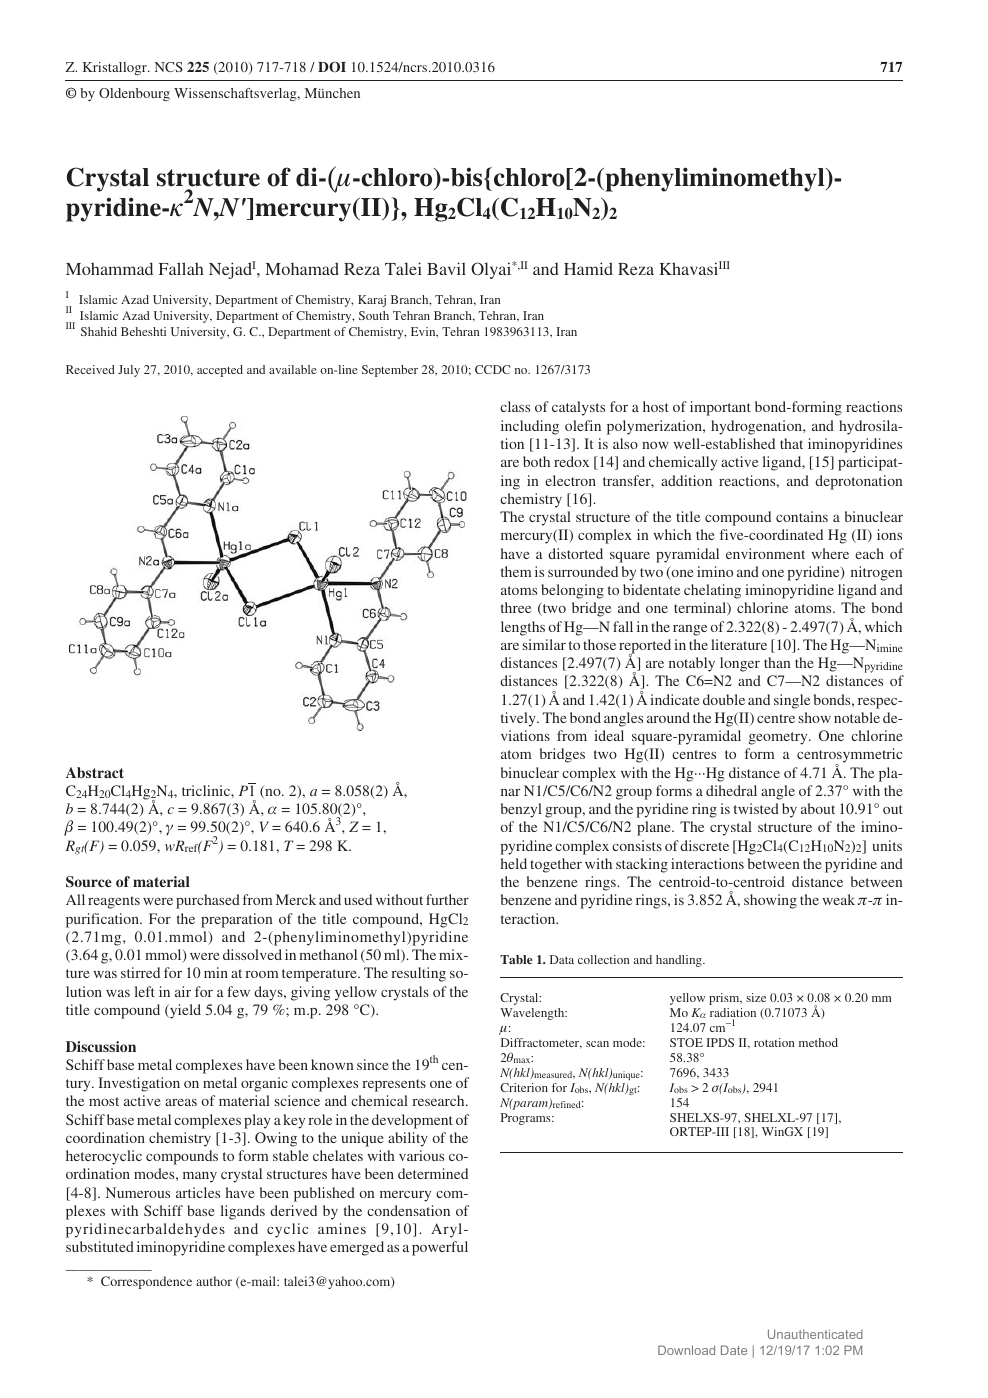 Crystal Structure Of Di M Chloro Bis Chloro 2 Phenyliminomethyl Pyridine K2n N Mercury Ii Hg2cl4 C12h10n2 2 Topic Of Research Paper In Chemical Sciences Download Scholarly Article Pdf And Read For Free On Cyberleninka Open Science Hub